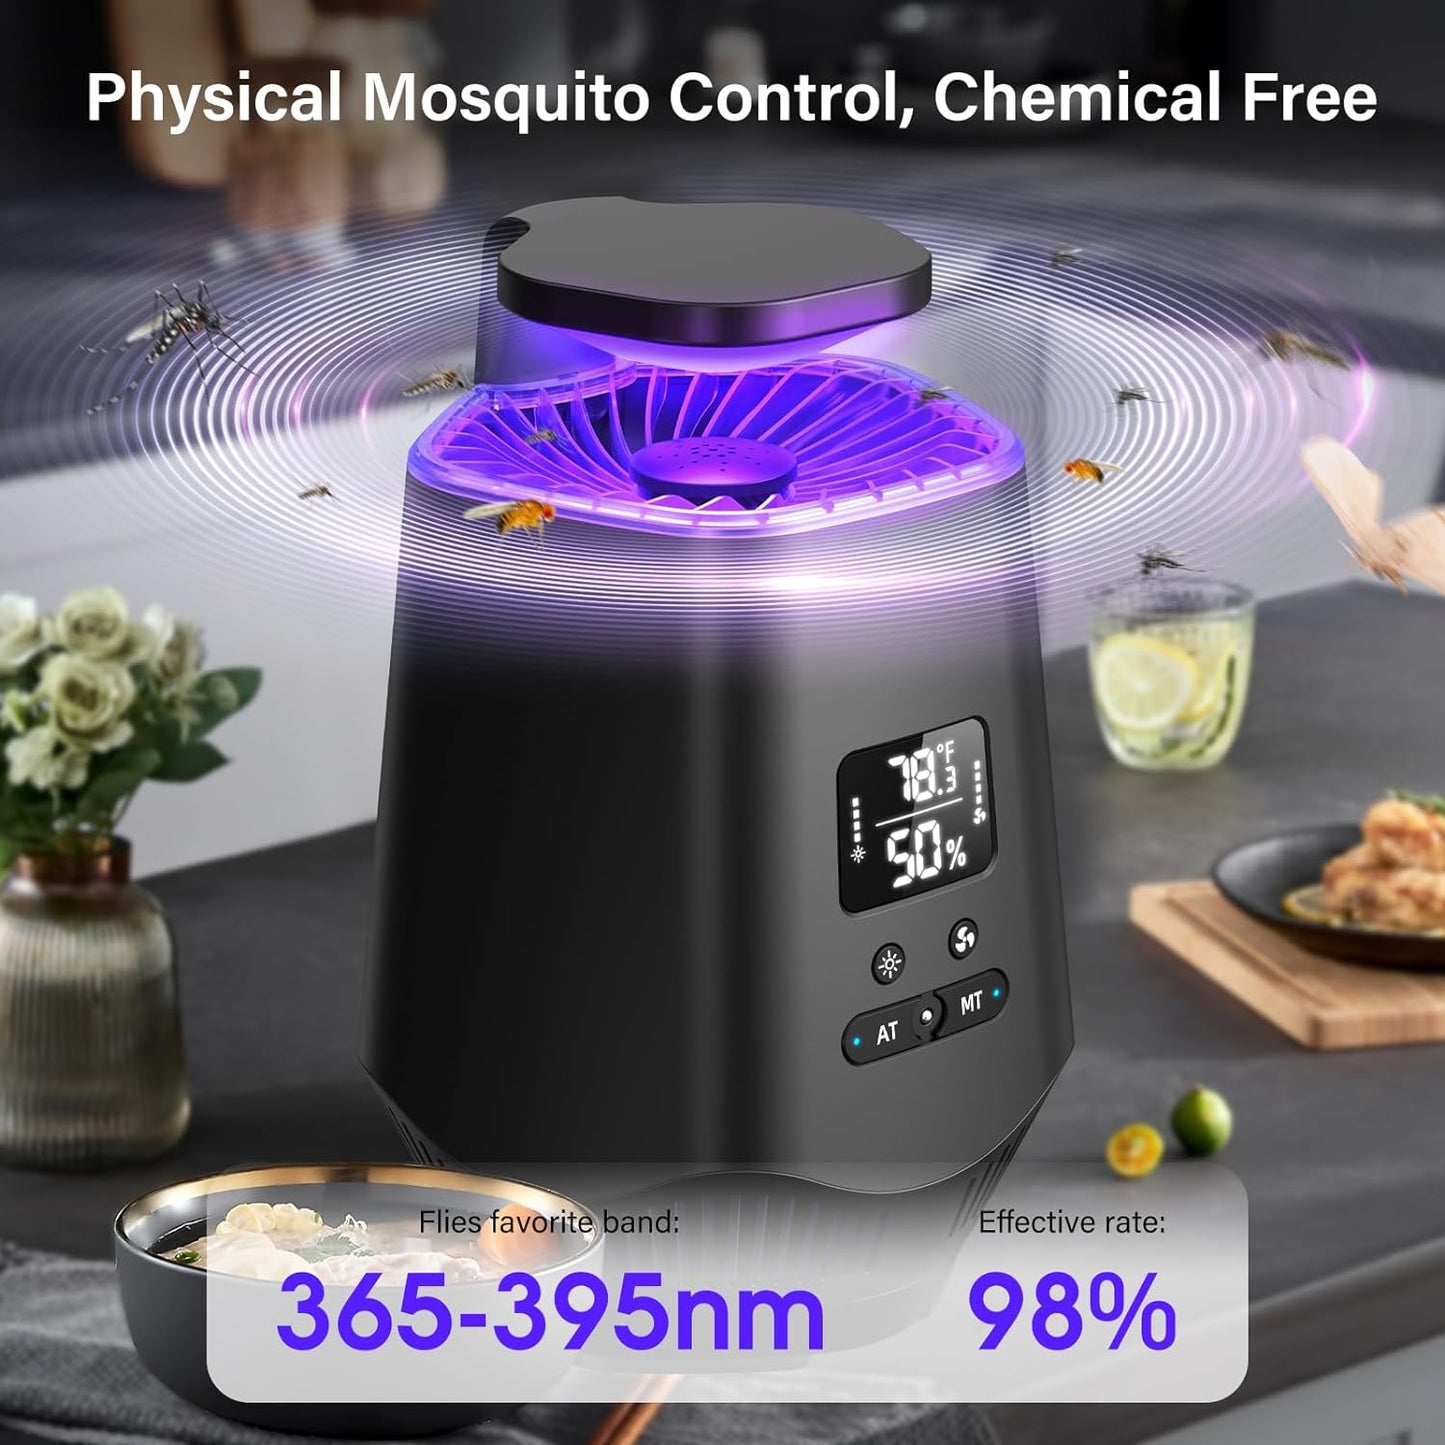 Fooxem Fruit Fly Traps for Indoors, Smart Flying Insect Trap with Temperature and Humidity Sensor, Bug Catcher Ligth for Home House Plants Gnats Moths Mosquitos Pest Control with Sticky Boards